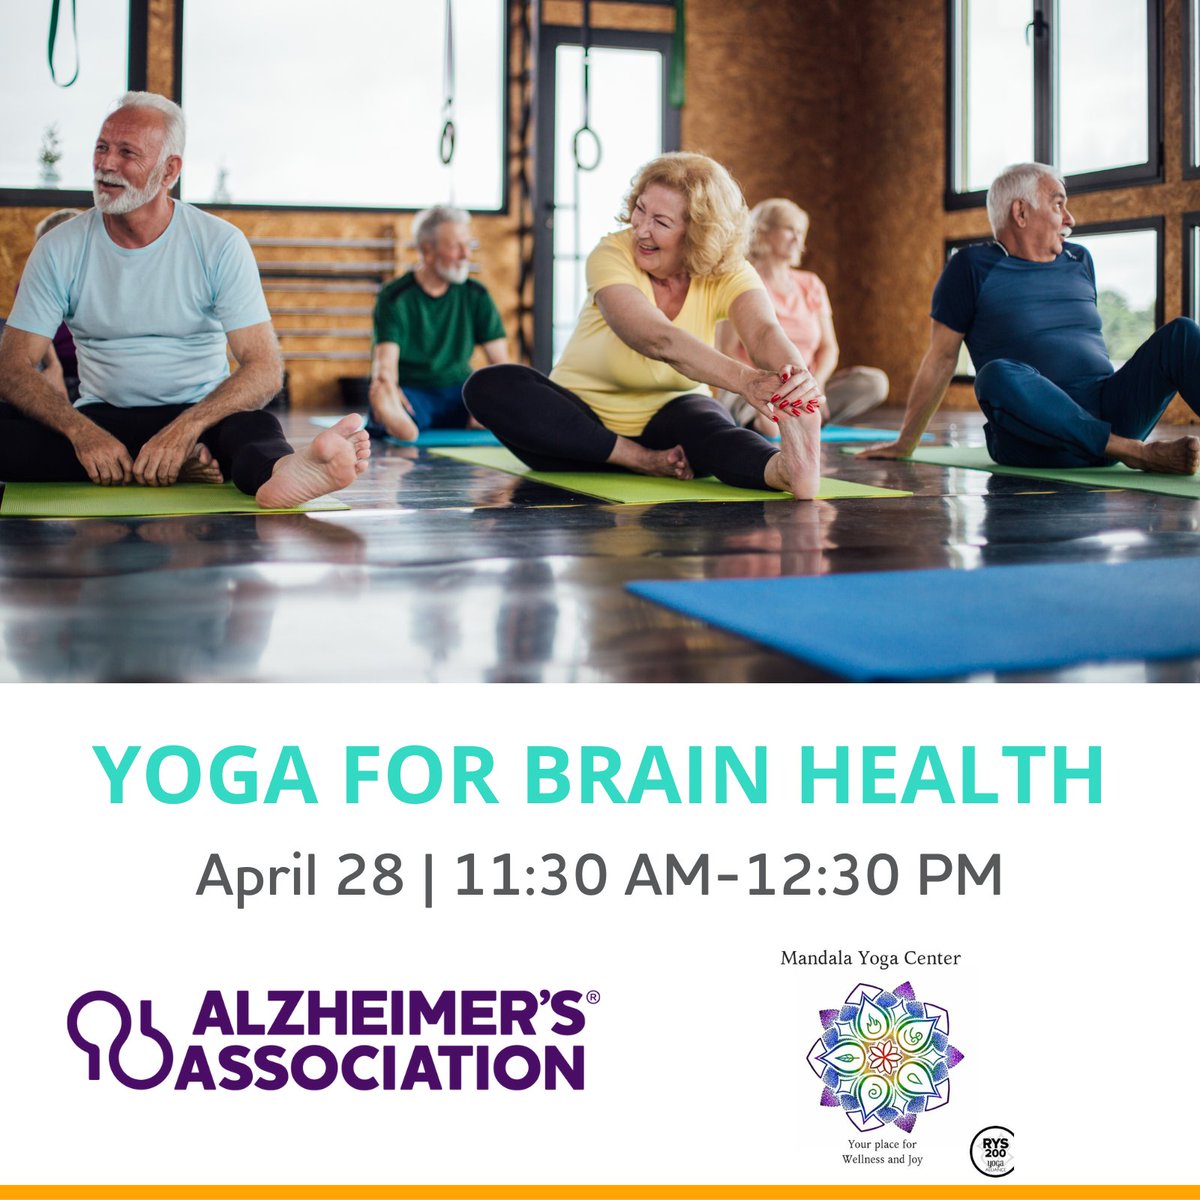 On 4/28 in Swansboro, in partnership with the @MandalaYoga_,  we're hosting “Yoga for Brain Health,” a free community class with 30 minutes of yoga and 30 minutes of brain health tips. All ability levels are welcome. tinyurl.com/ALZyoga1 #SwansboroNC #OnslowCountyNC #ENDALZ